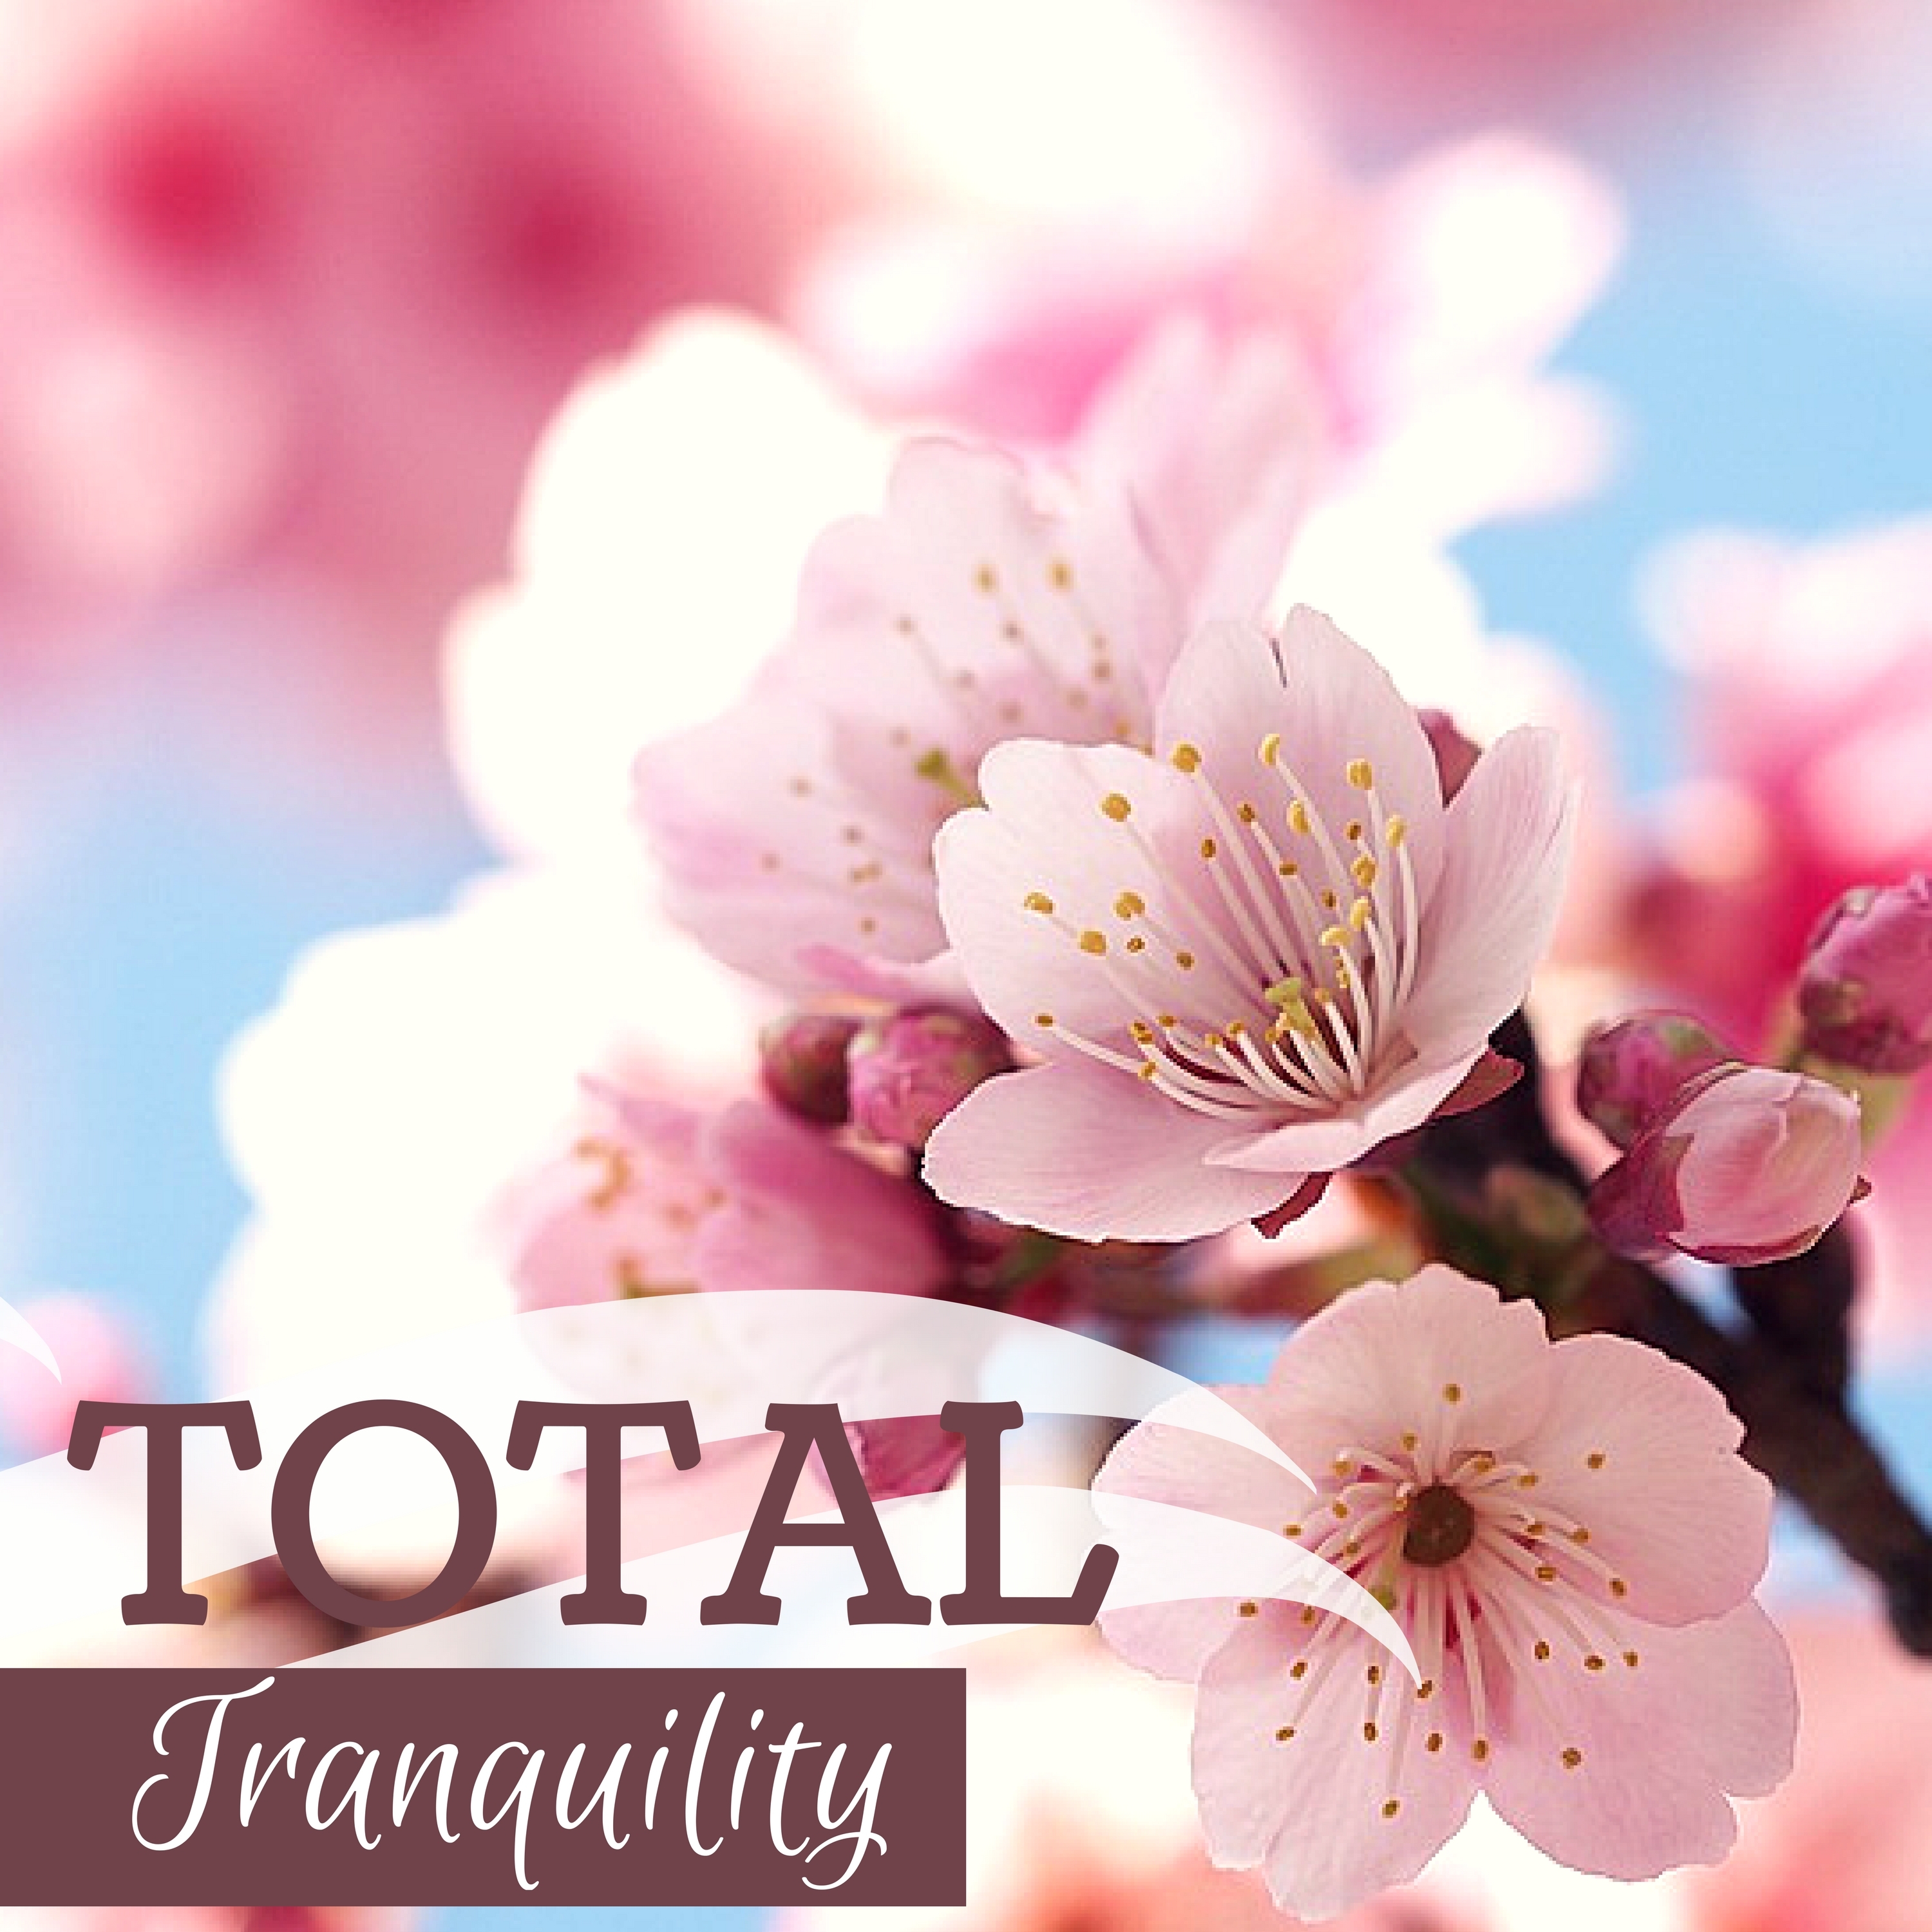 Total Tranquility - Healing Sounds, Delta Waves for Sleep Stimulation, Sleeping System